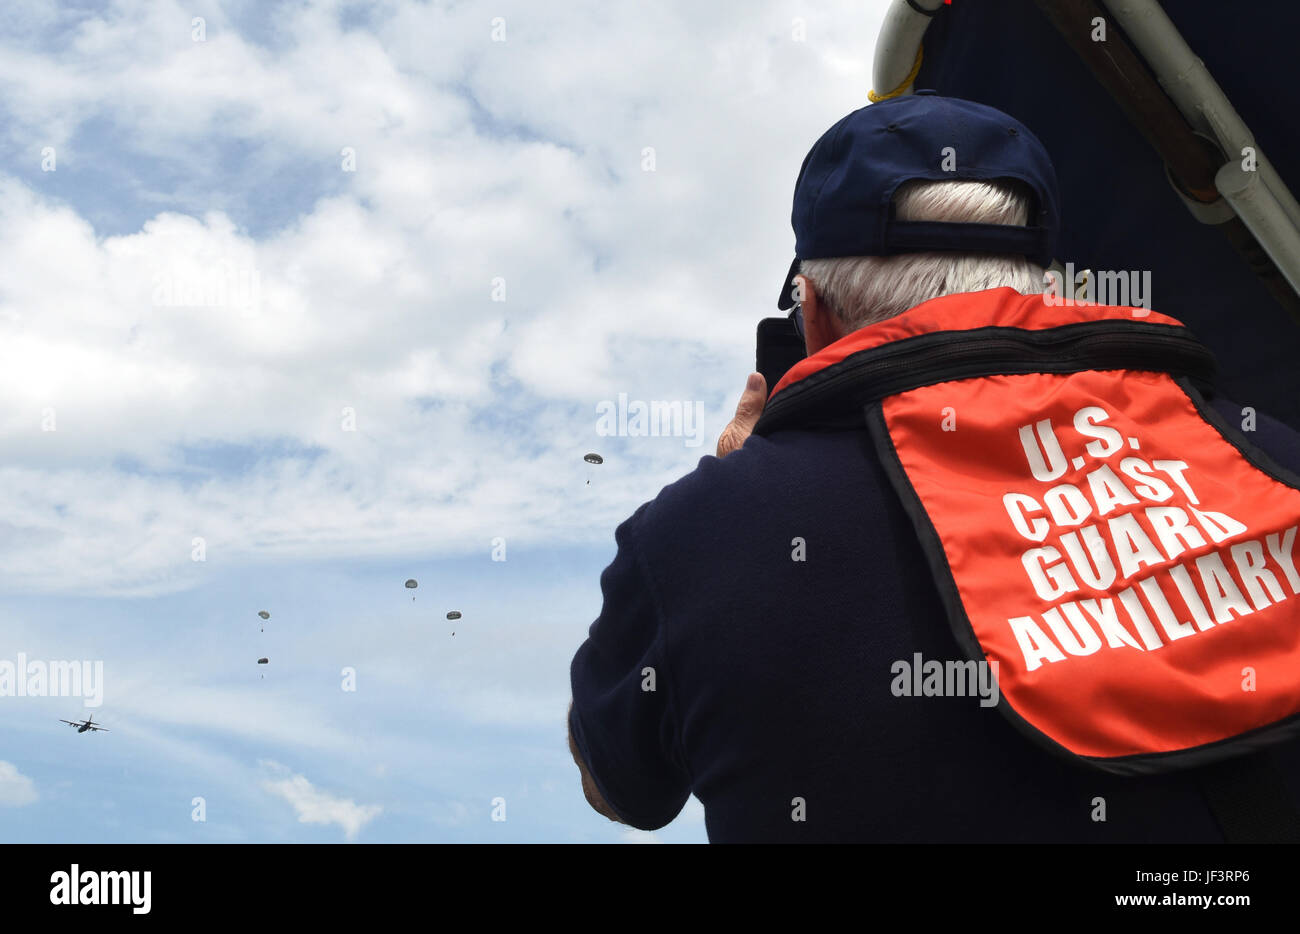 A member of the U.S. Coast Guard Auxiliary watches as members of the 181st Weather Flight parachute out of a C-130 Hercules during a deliberate water drop into Lake Worth in Forth Worth, Texas, May 20, 2017. The Coast Guard Auxiliary provided boat support to aid in parachute and jumper recovery, and provided medevac capabilities if necessary. (Texas Air National Guard photo by Staff Sgt. Kristina Overton) Stock Photo